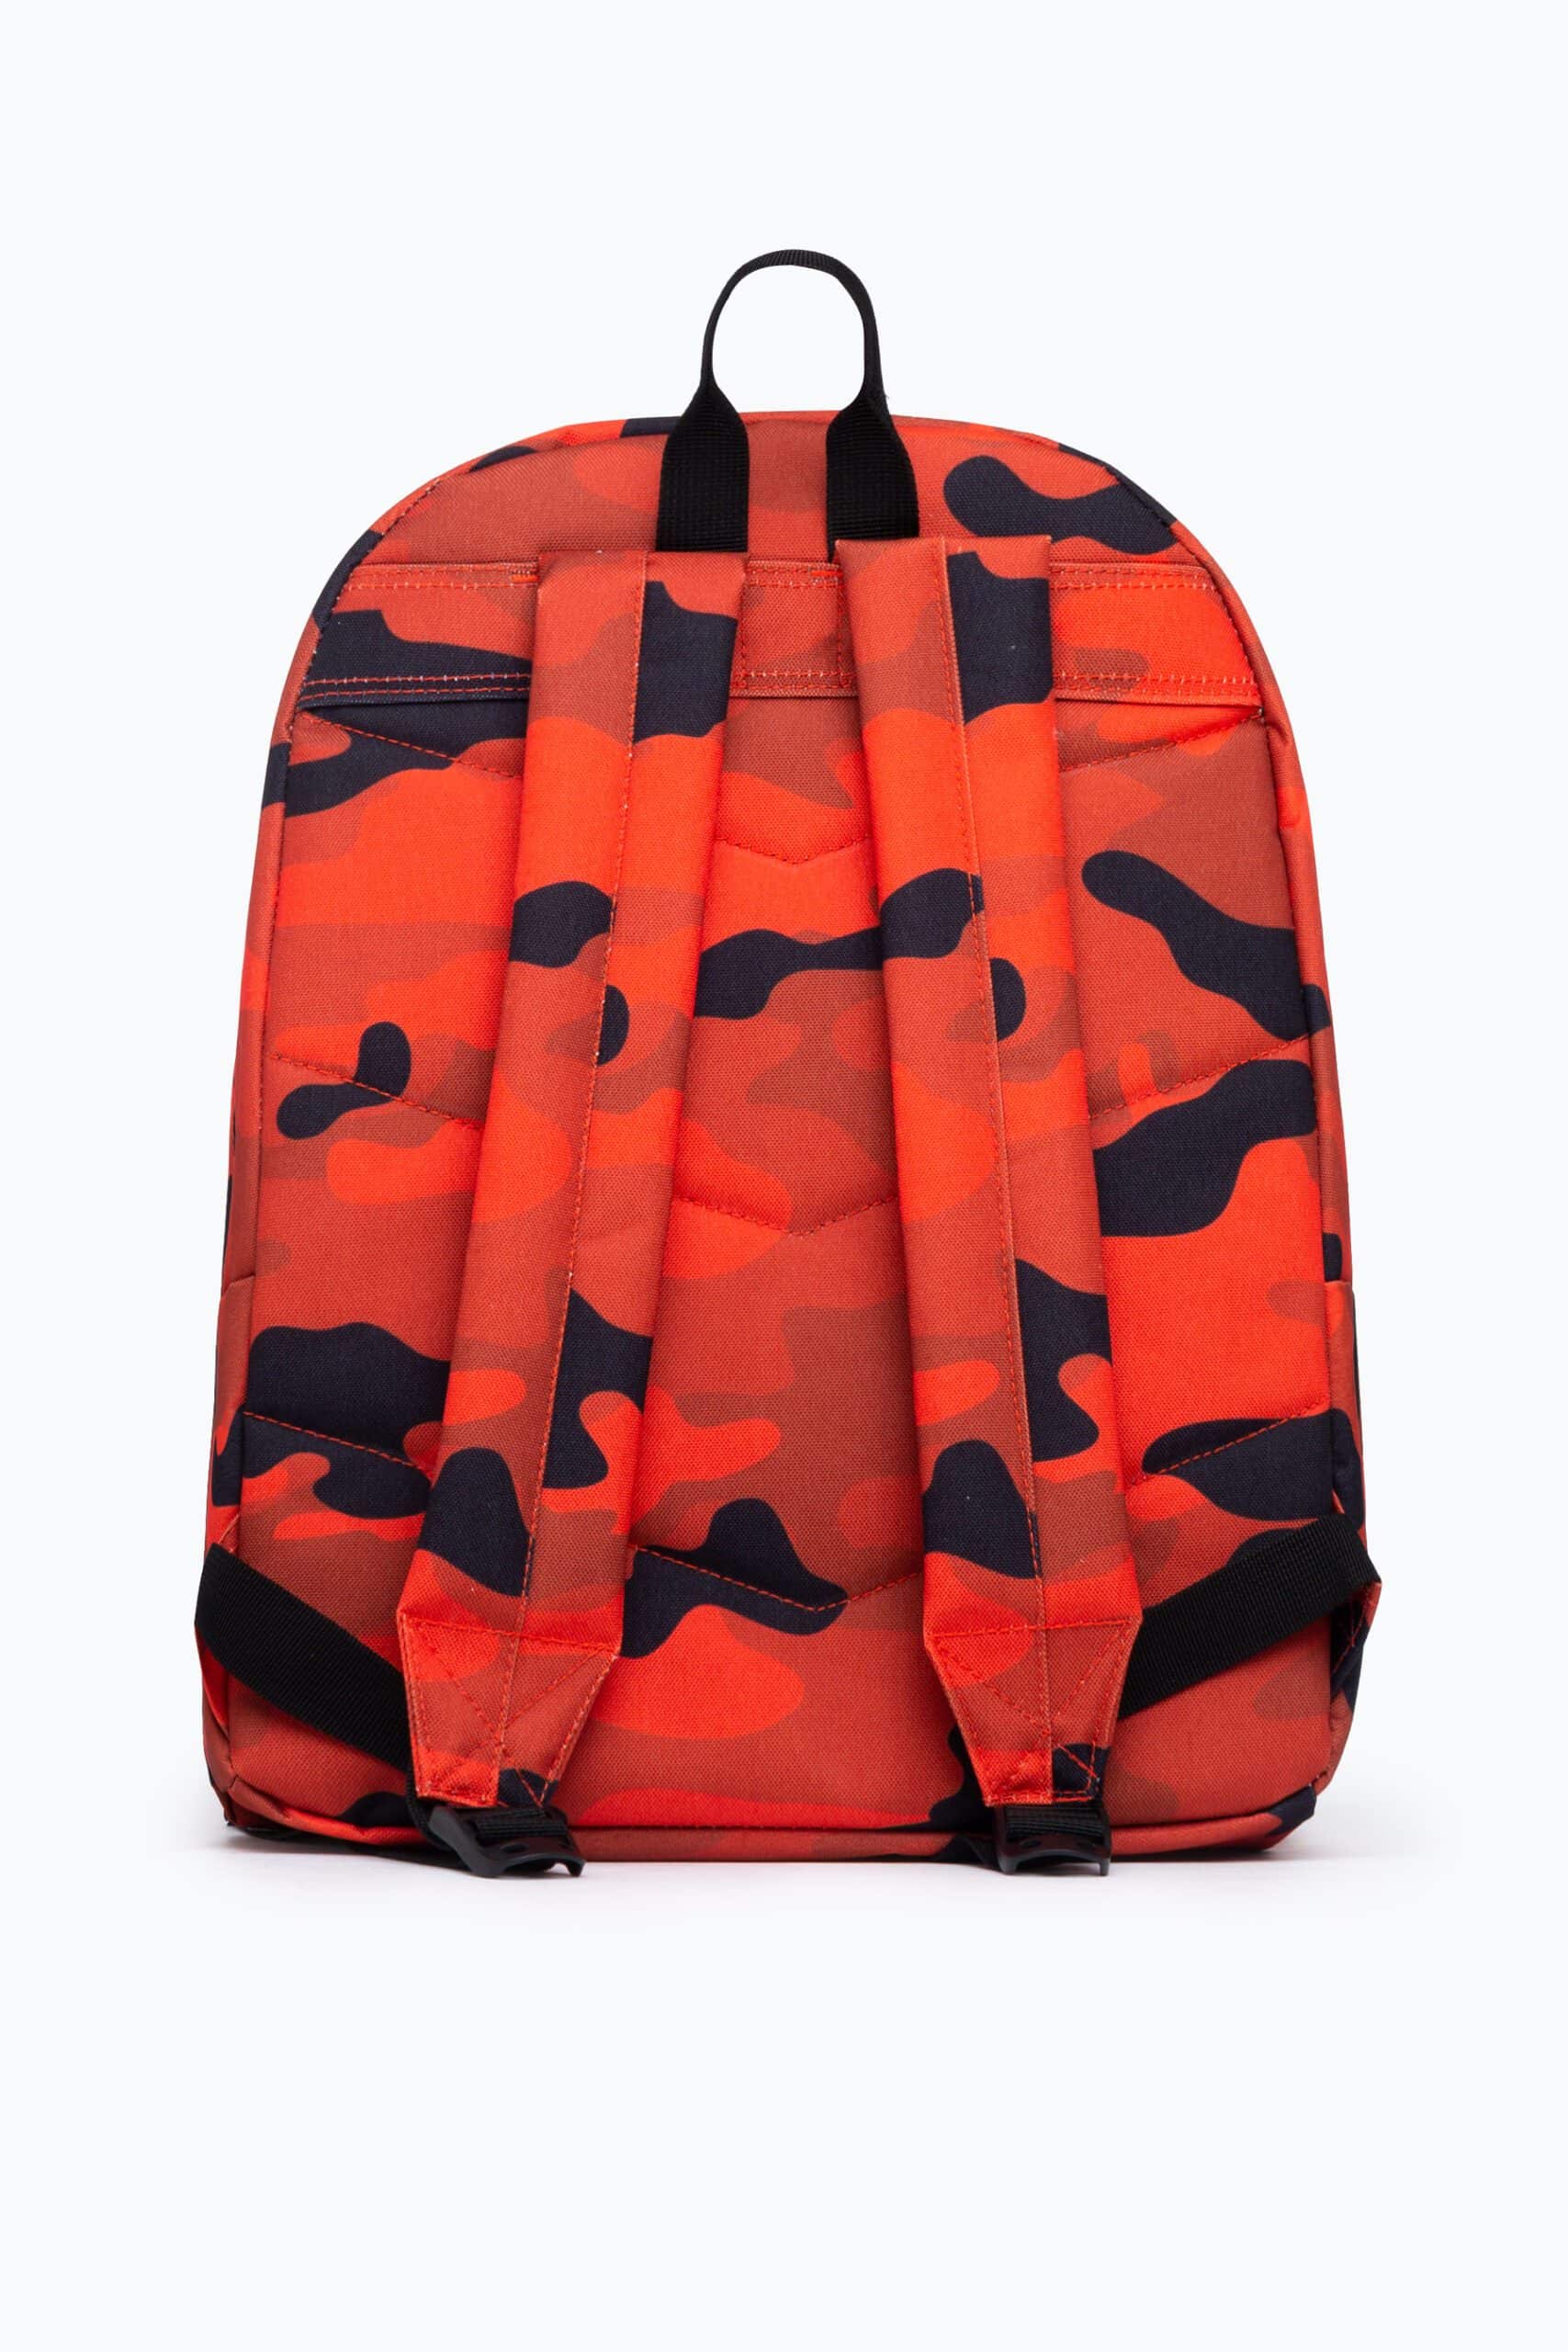 hype red camo backpack back view